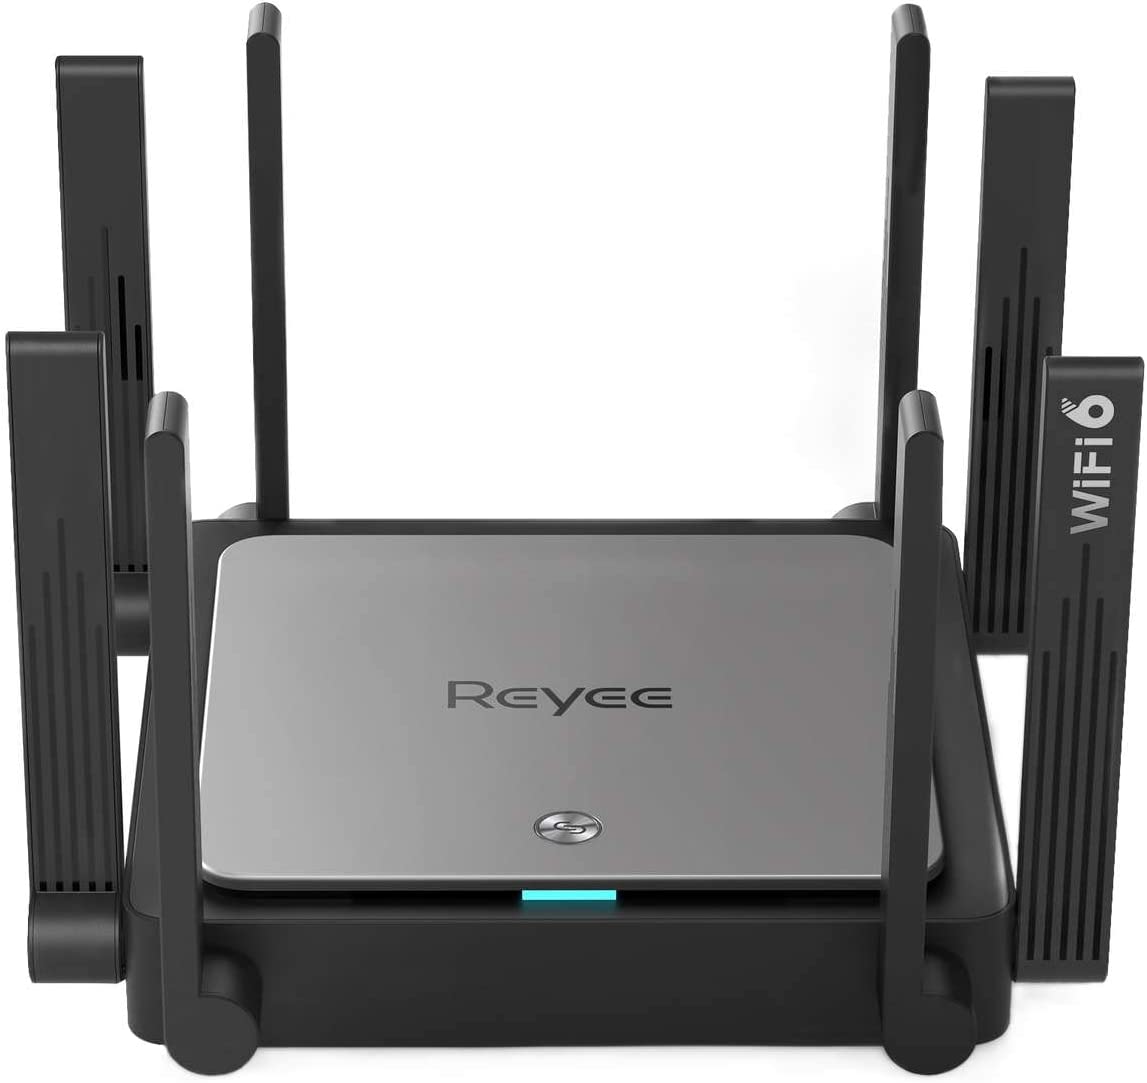 Review of the Reyee RG-E5 Wi-Fi 6 Router